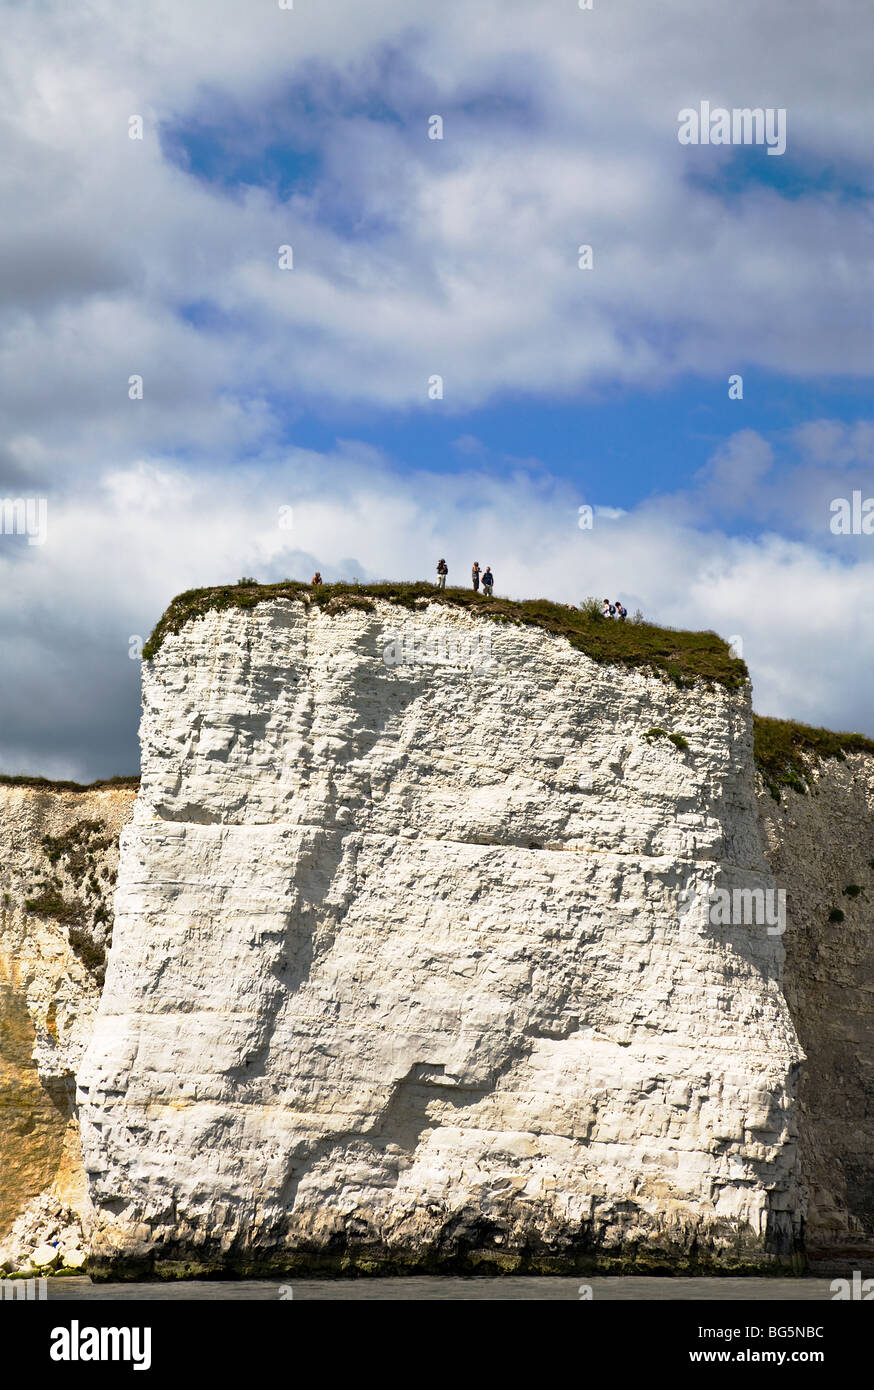 People standing on the clifftop at Handfast Point, by Old Harry Rocks. Dorset coast. UK. Stock Photo